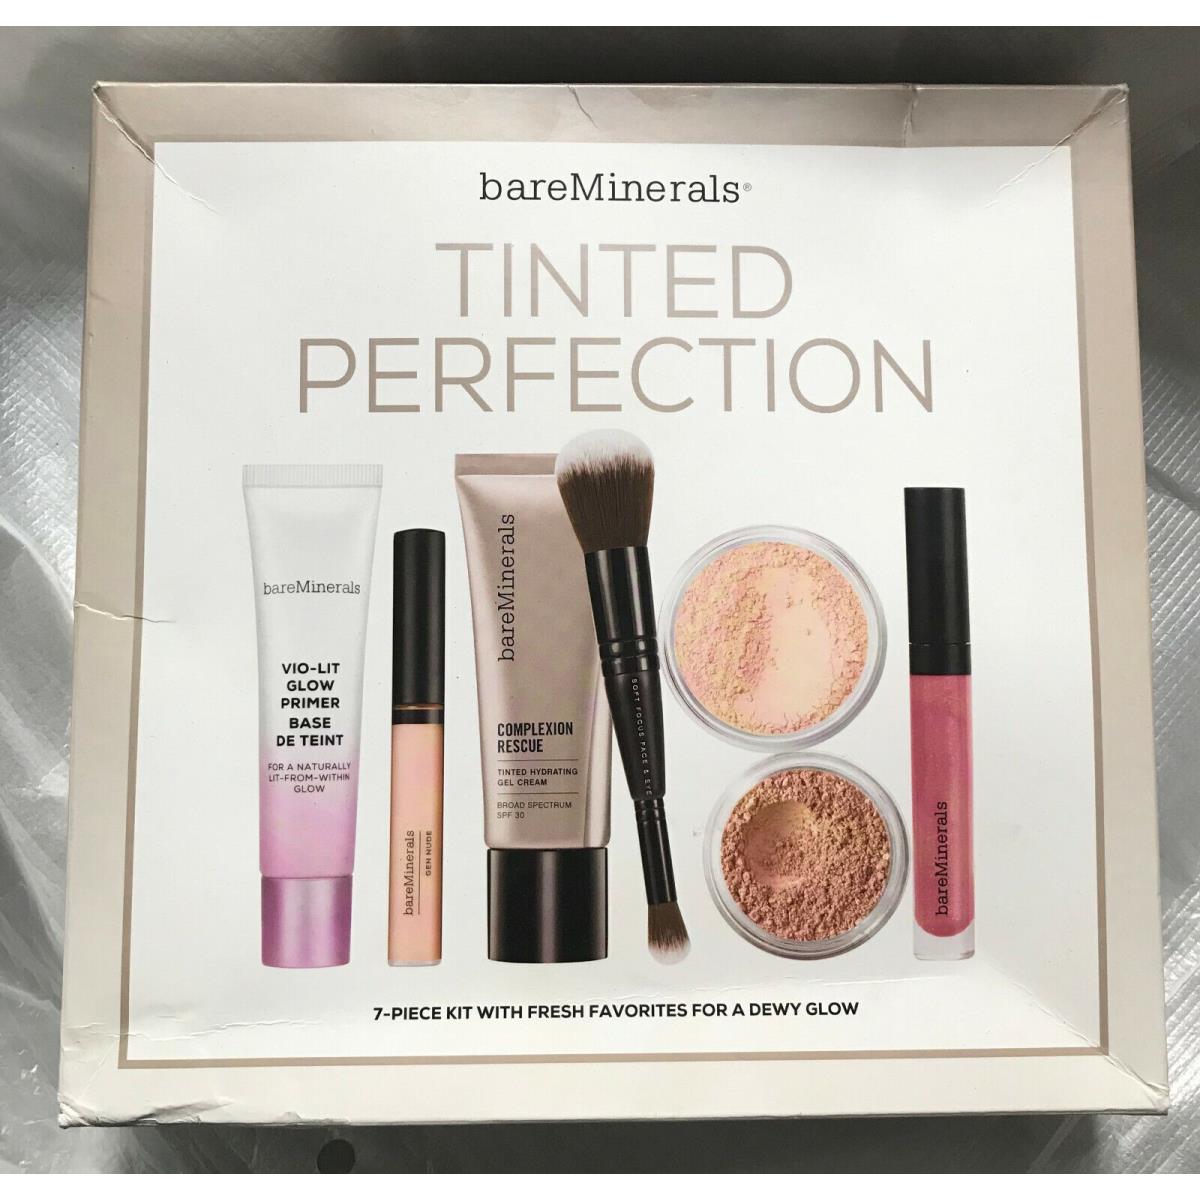 Bareminerals Tinted Perfection 7 Piece Kit For a Dewy Glow